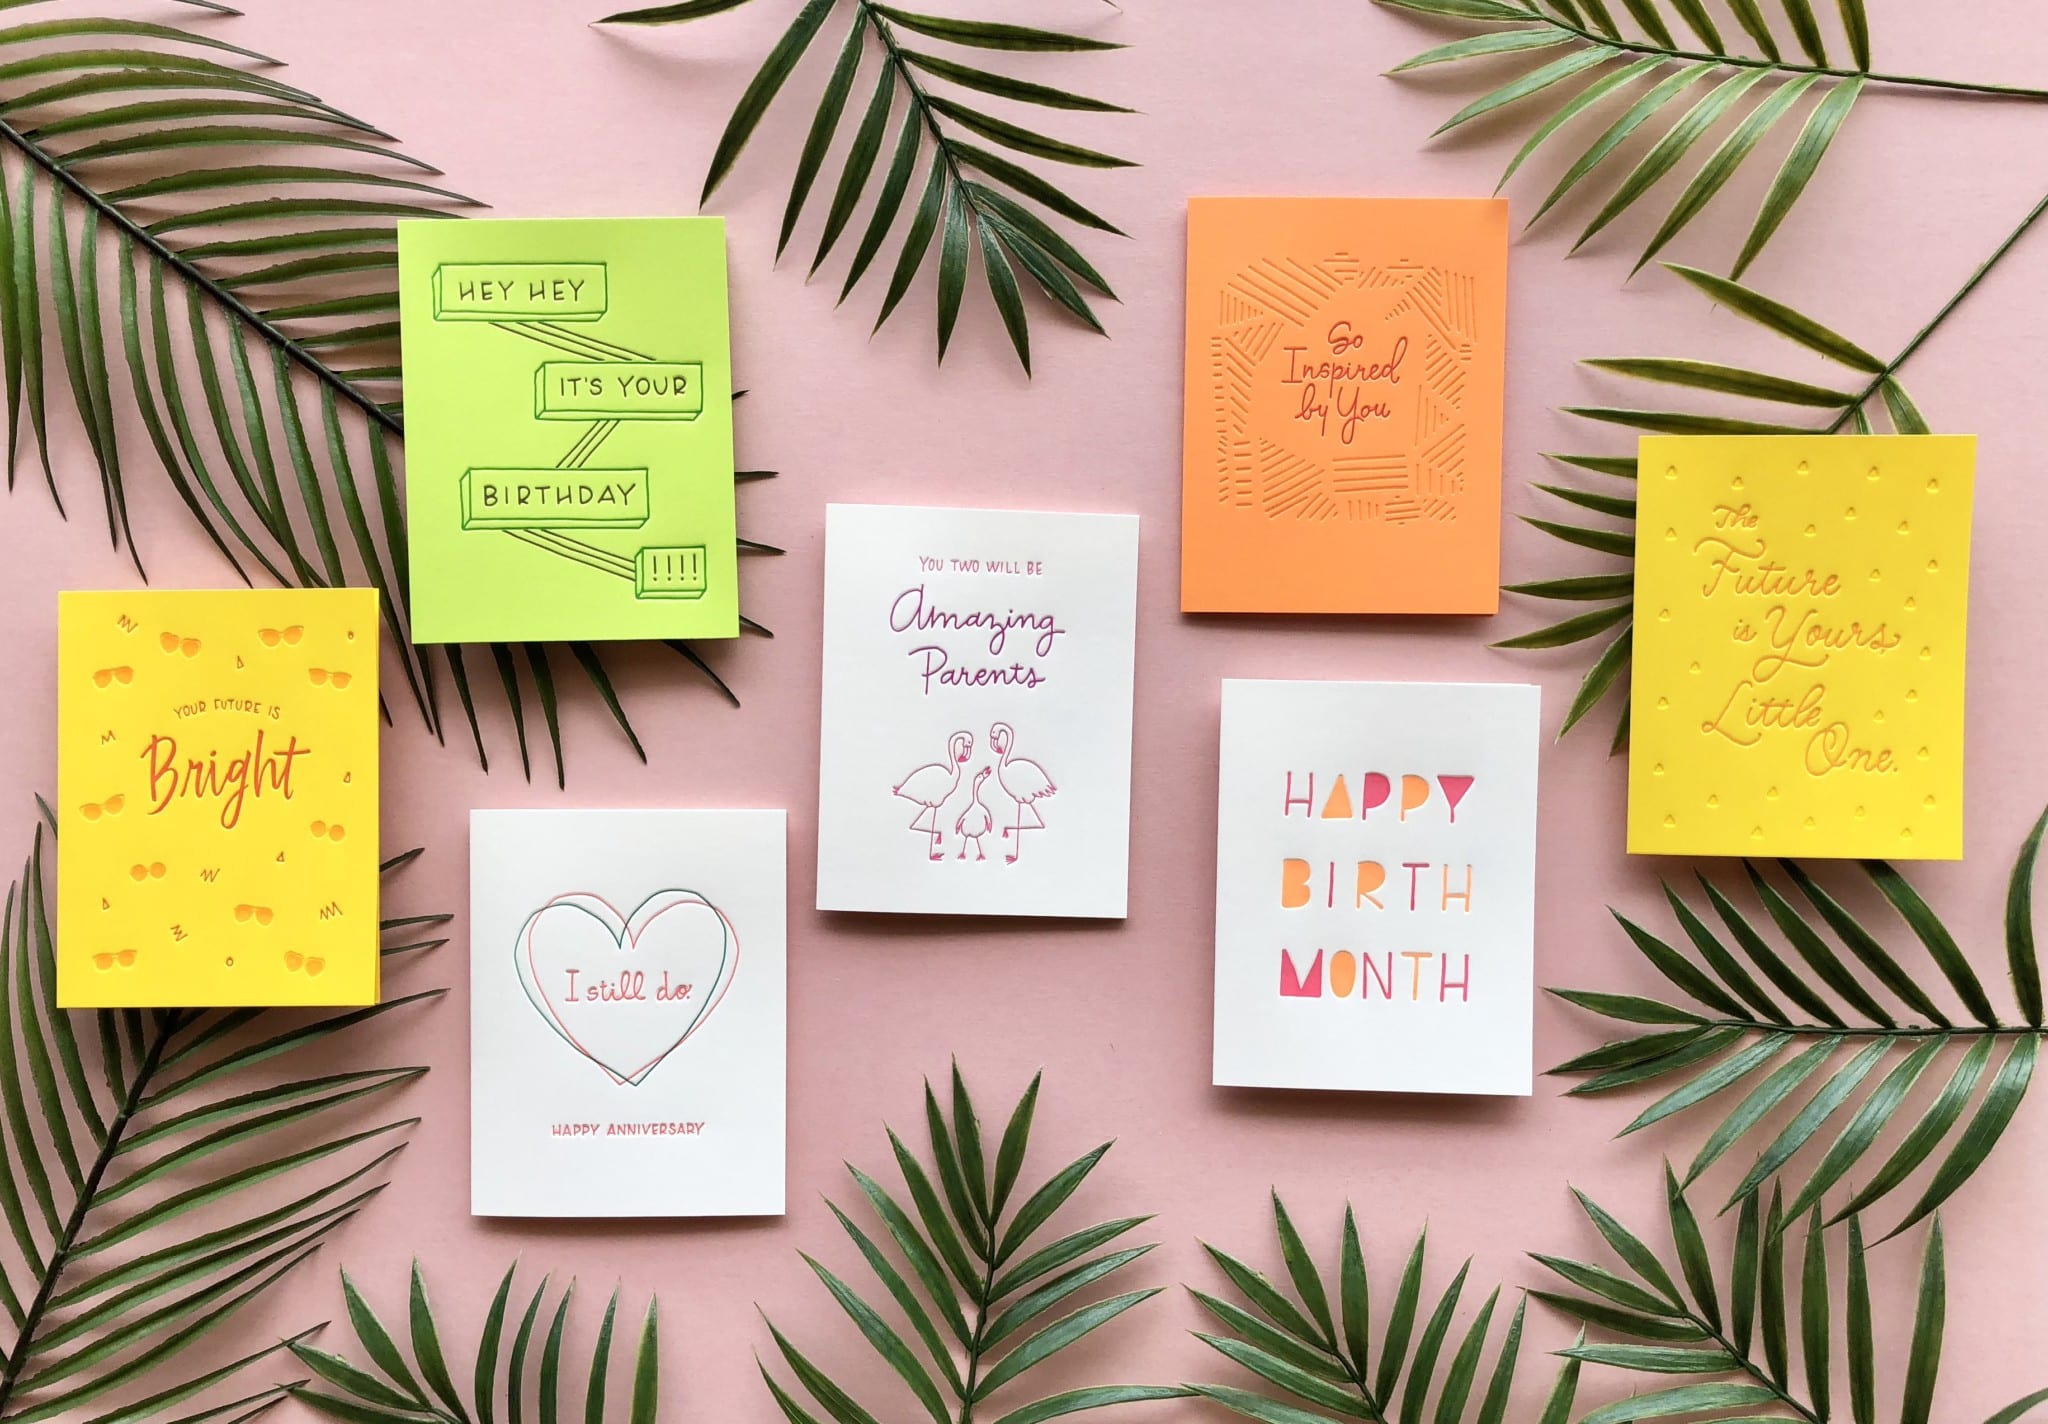 assorted greeting cards arranged on light pink background with palm leaves